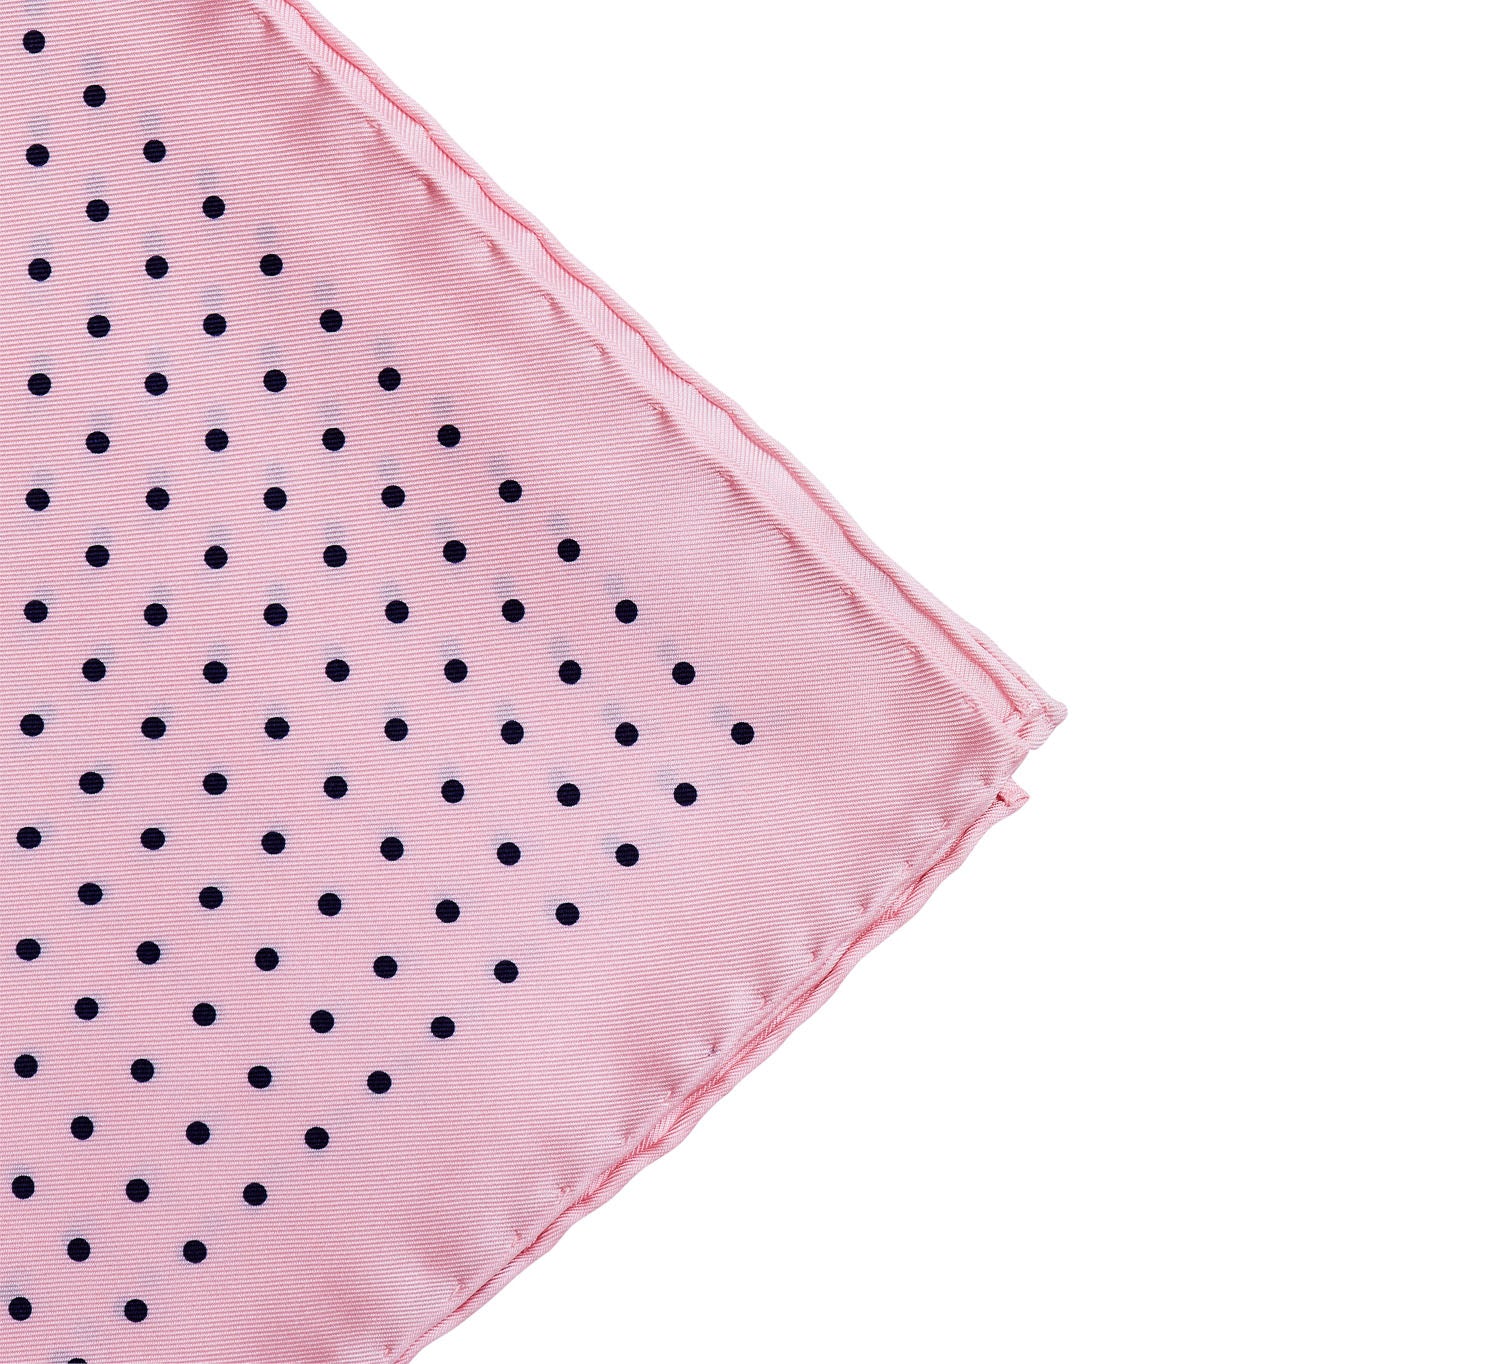 A pink polka dot silk Sovereign Grade 100% Silk Pink London Dot Pocket Square with black dots, hand-rolled edges, from KirbyAllison.com.